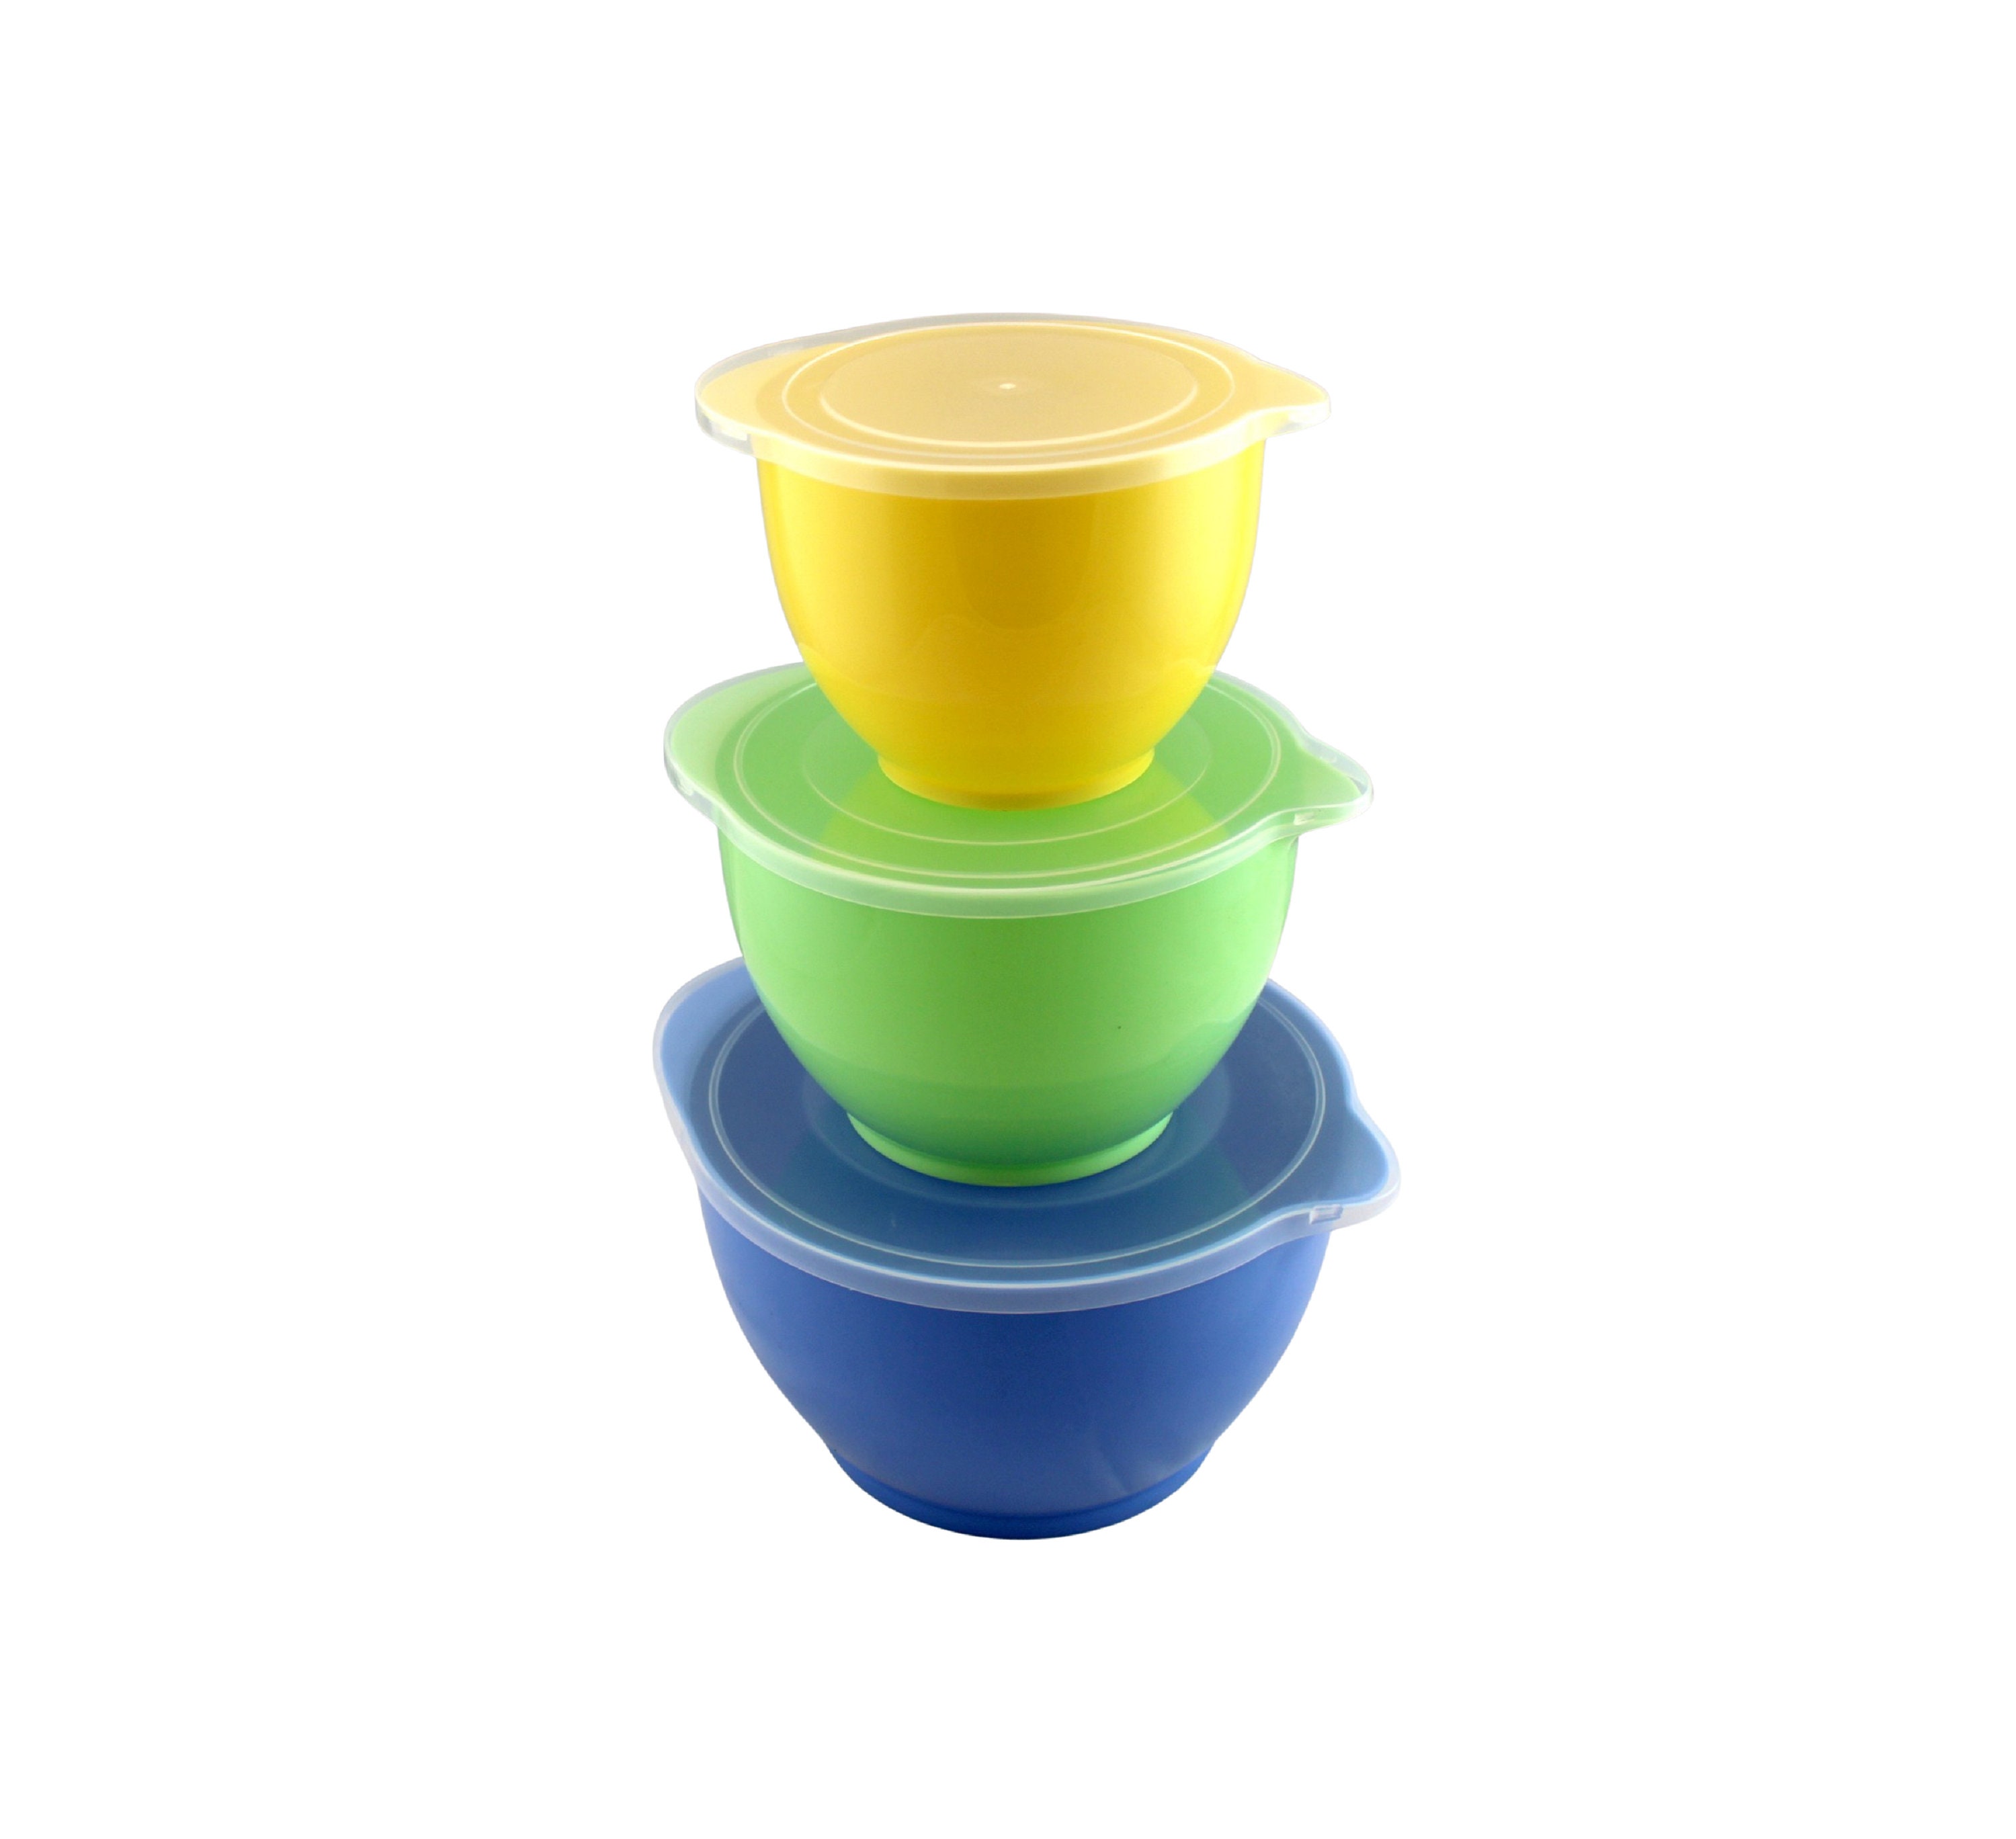 Vremi 3 Piece Plastic Mixing Bowl Set - Nesting Mixing Bowl with Rubber  Grip Handles Easy Pour Spout and Non Slip Bottom - Three Sizes Small Large  Cap - Household Items, Facebook Marketplace